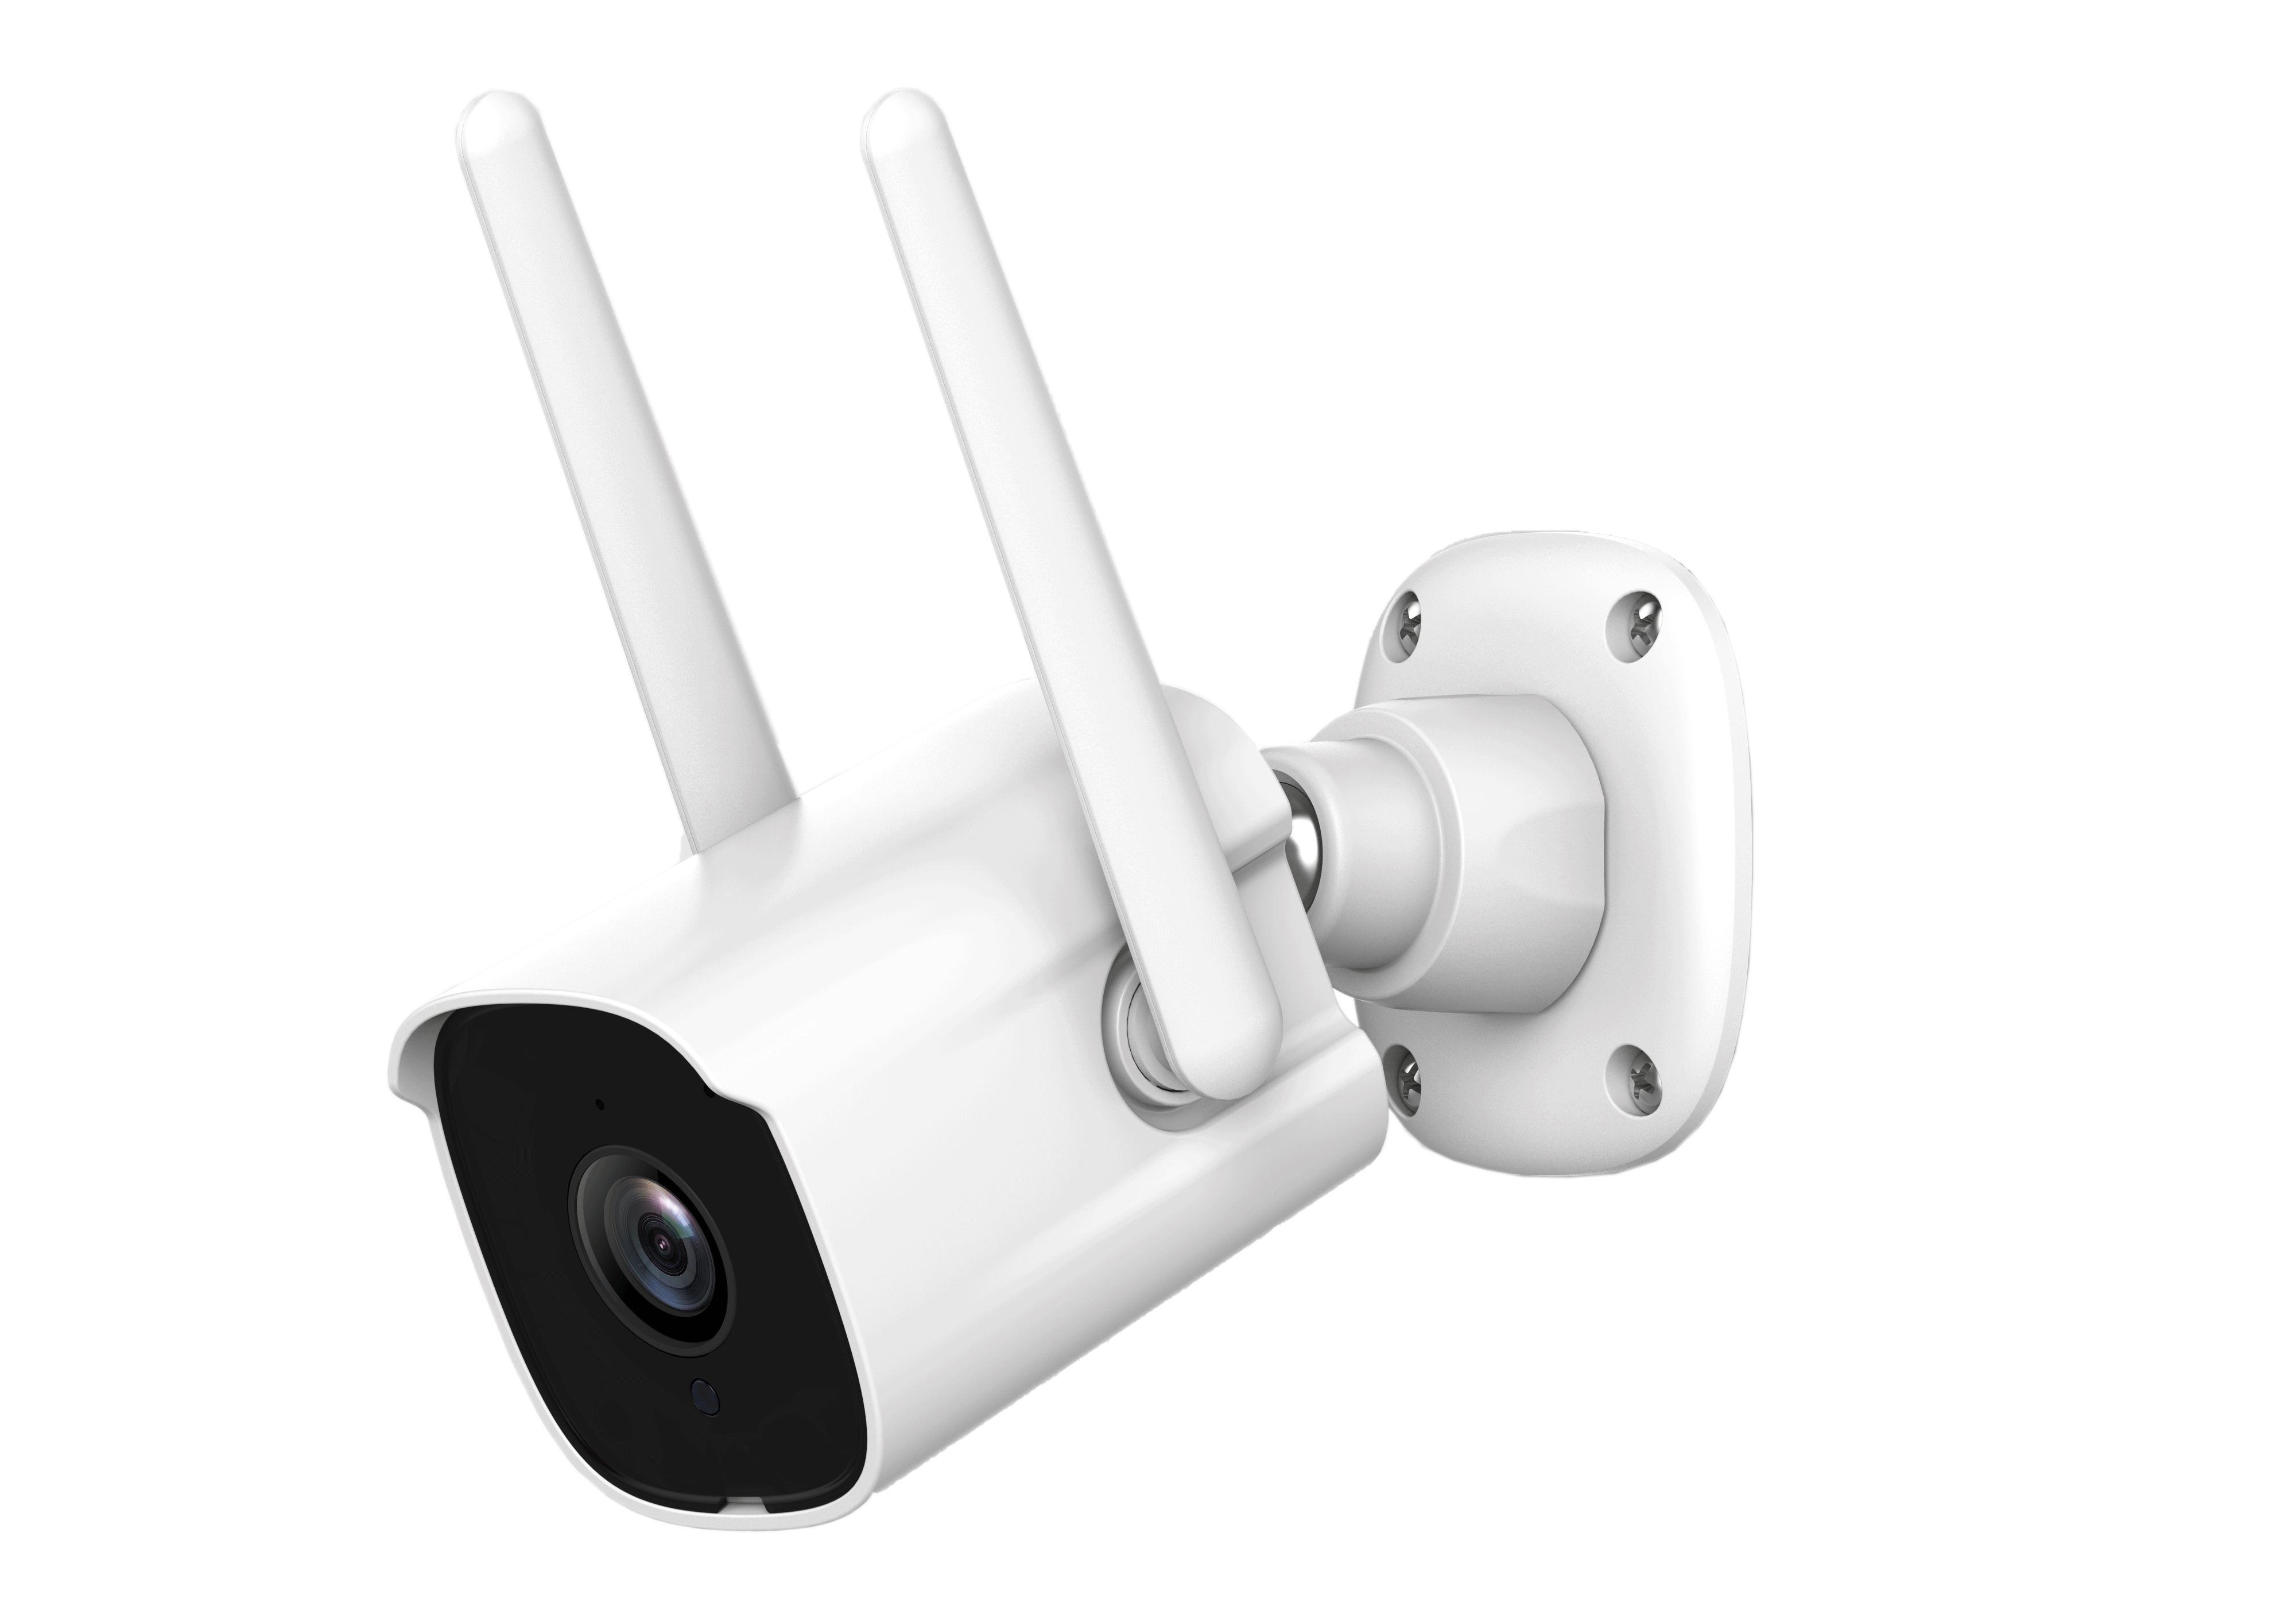 Wireless security cameras can't see well at night?